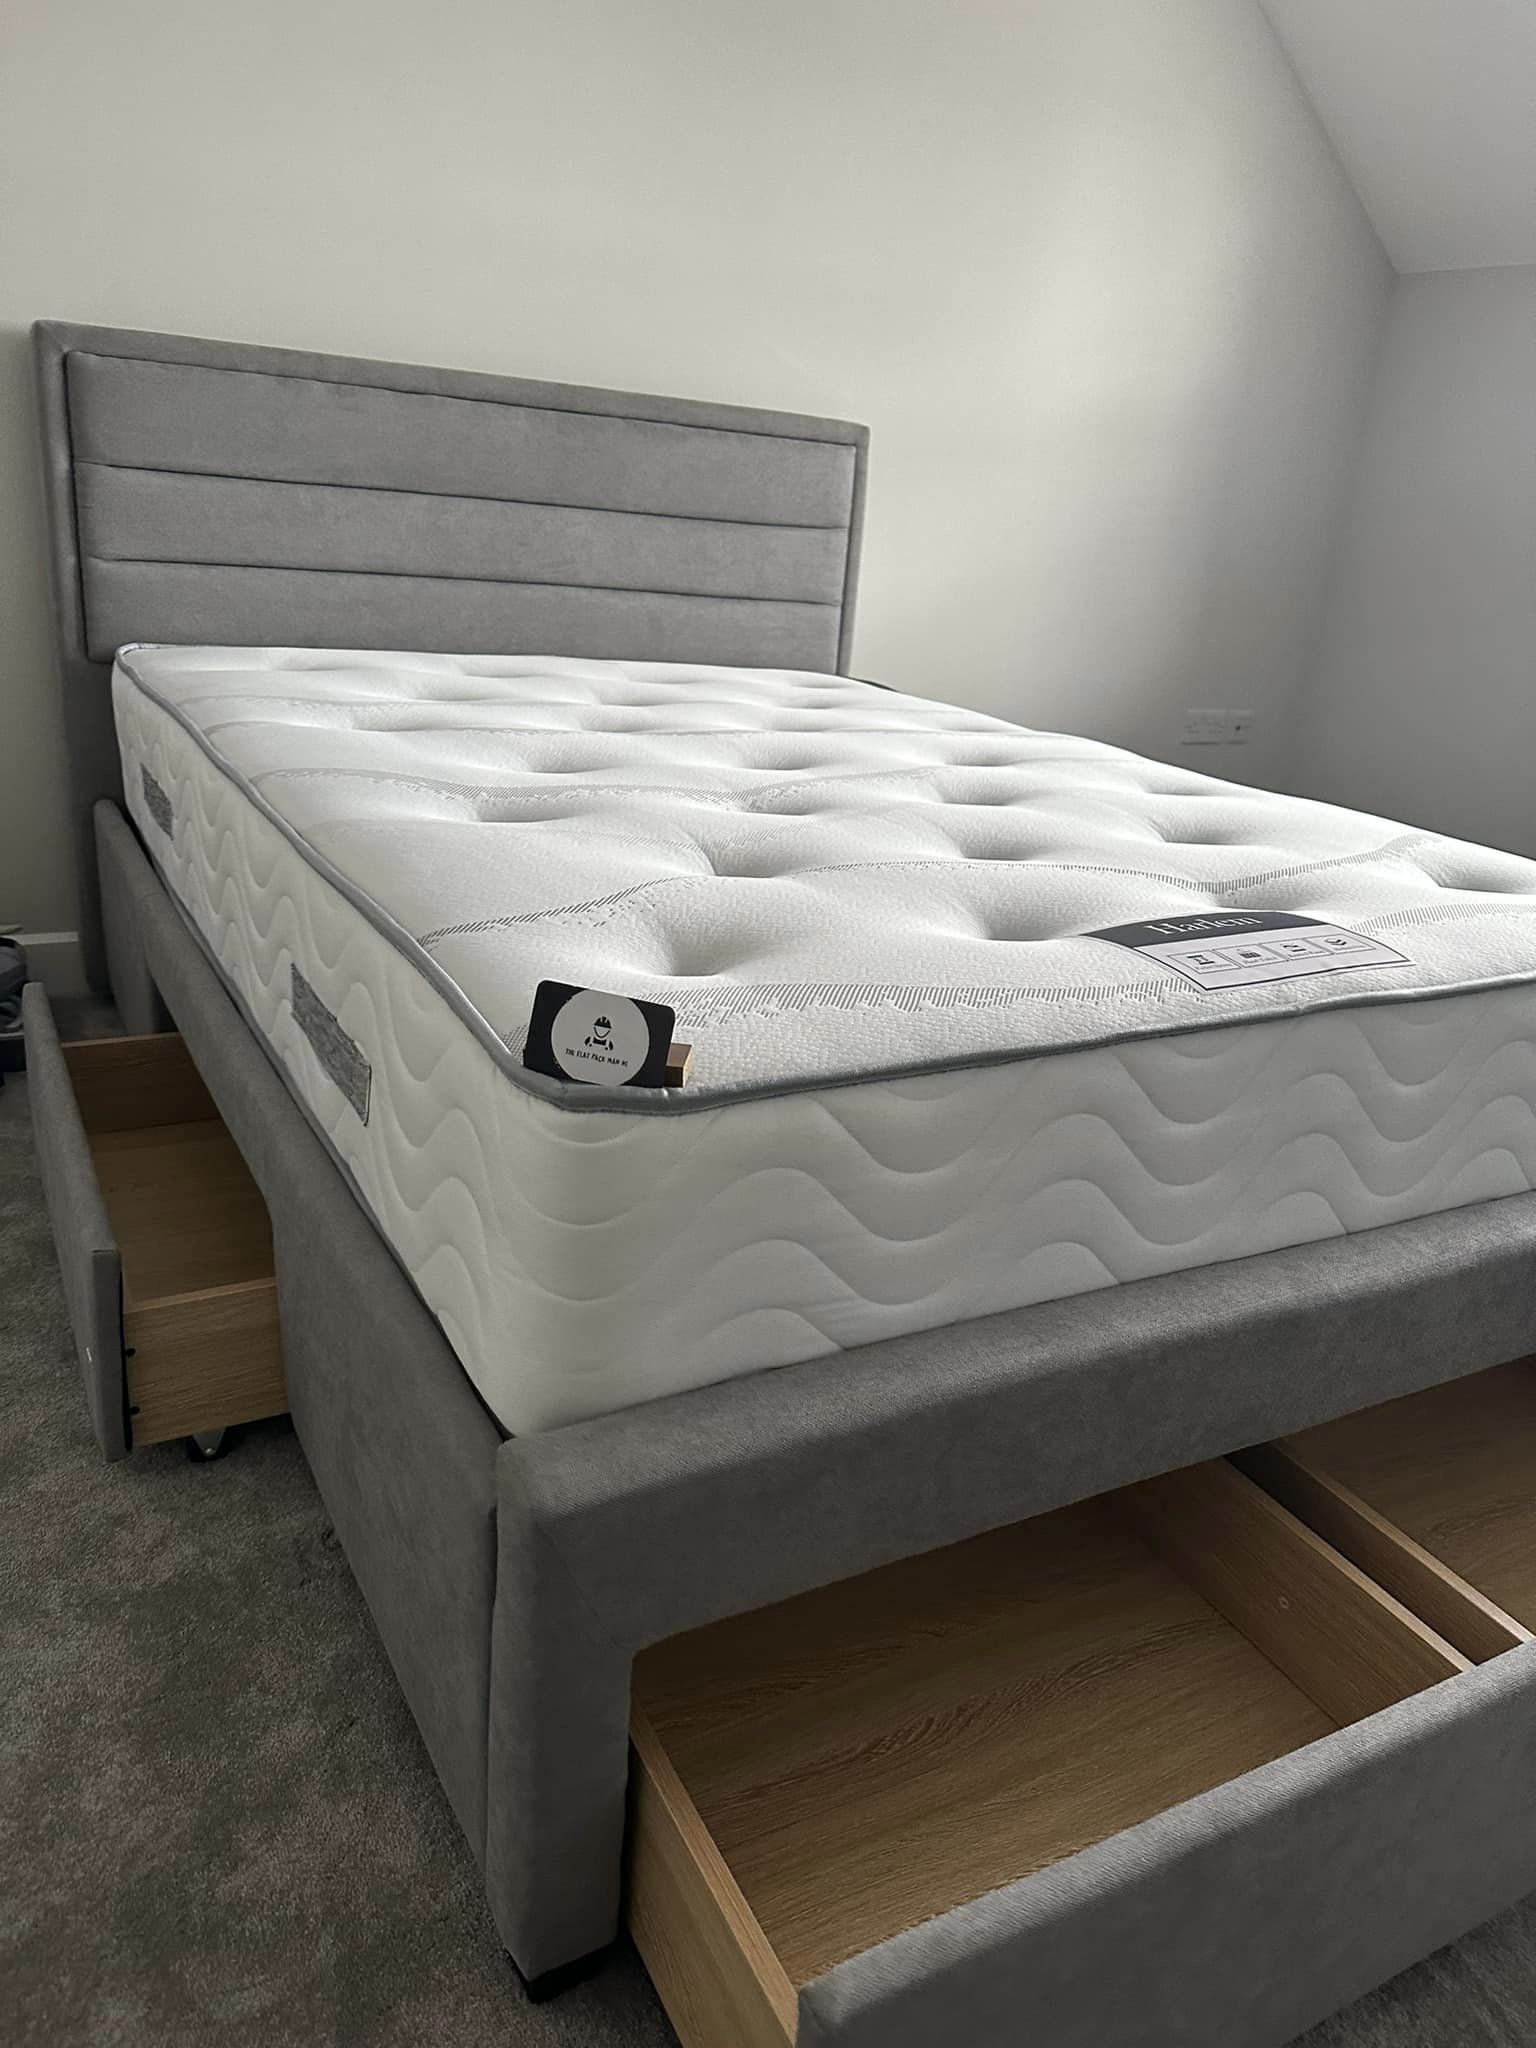 Thick mattress on top of grey material double bed